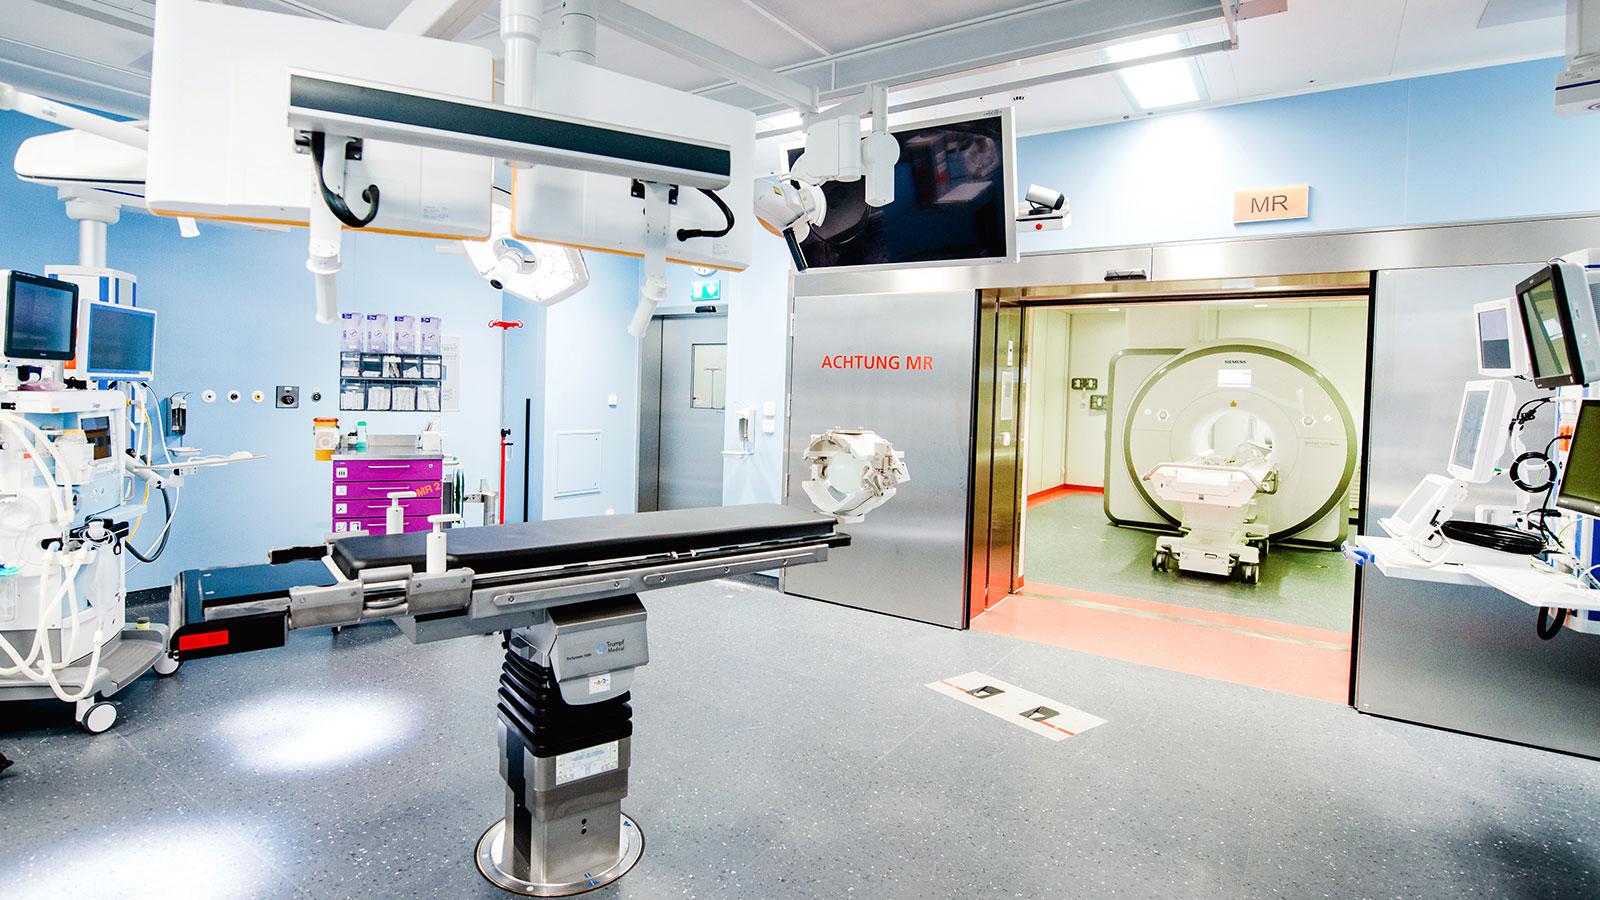 Photo of the operating theater with MRI system in the background